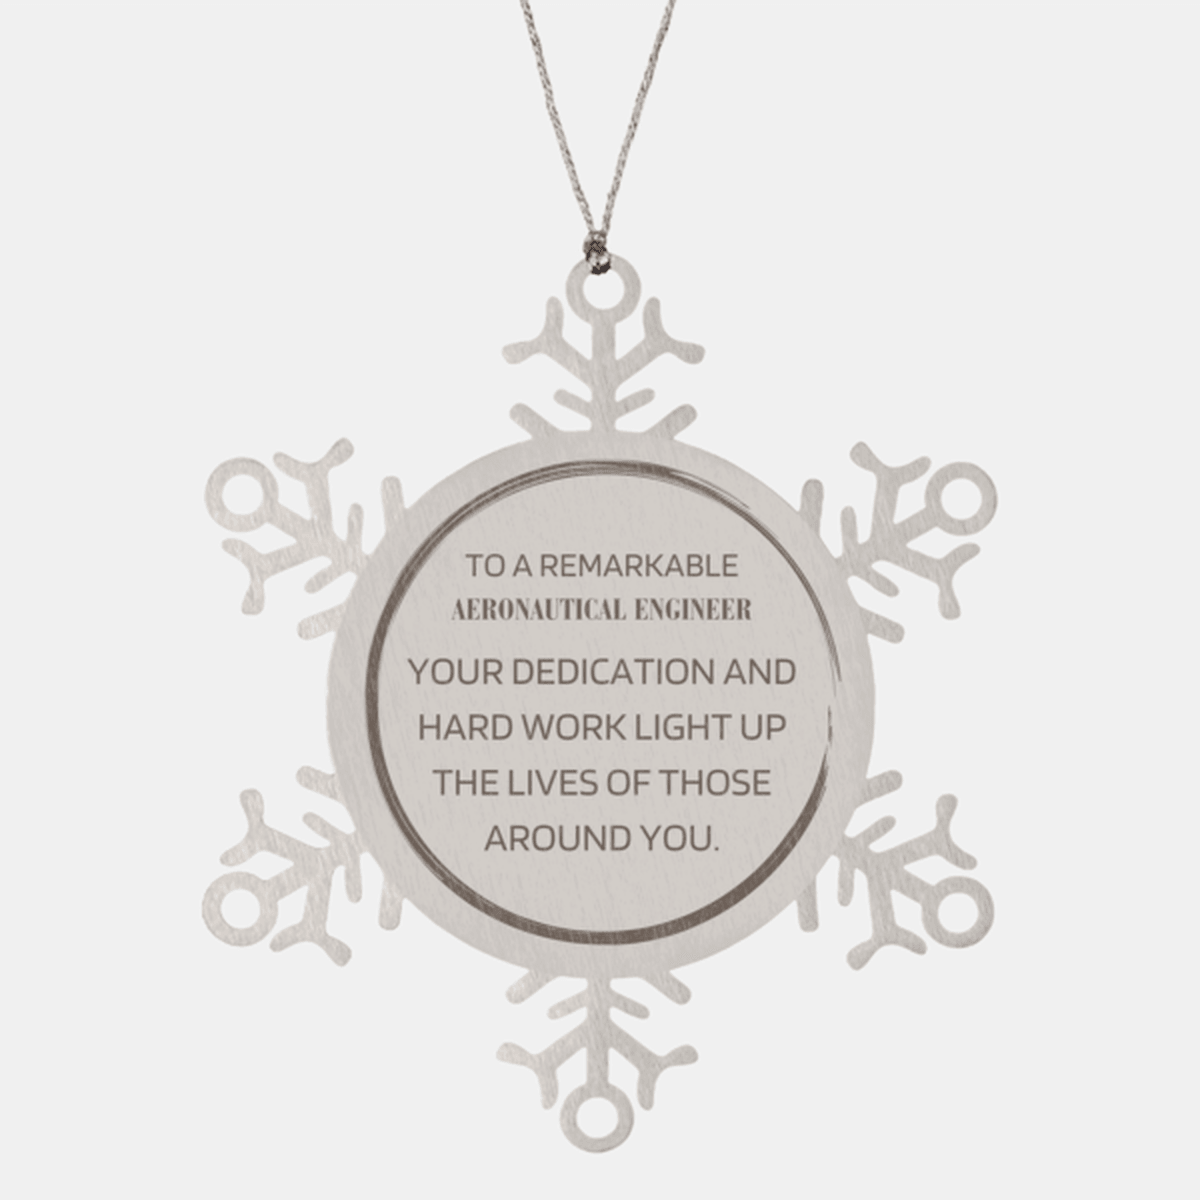 Remarkable Aeronautical Engineer Gifts, Your dedication and hard work, Inspirational Birthday Christmas Unique Snowflake Ornament For Aeronautical Engineer, Coworkers, Men, Women, Friends